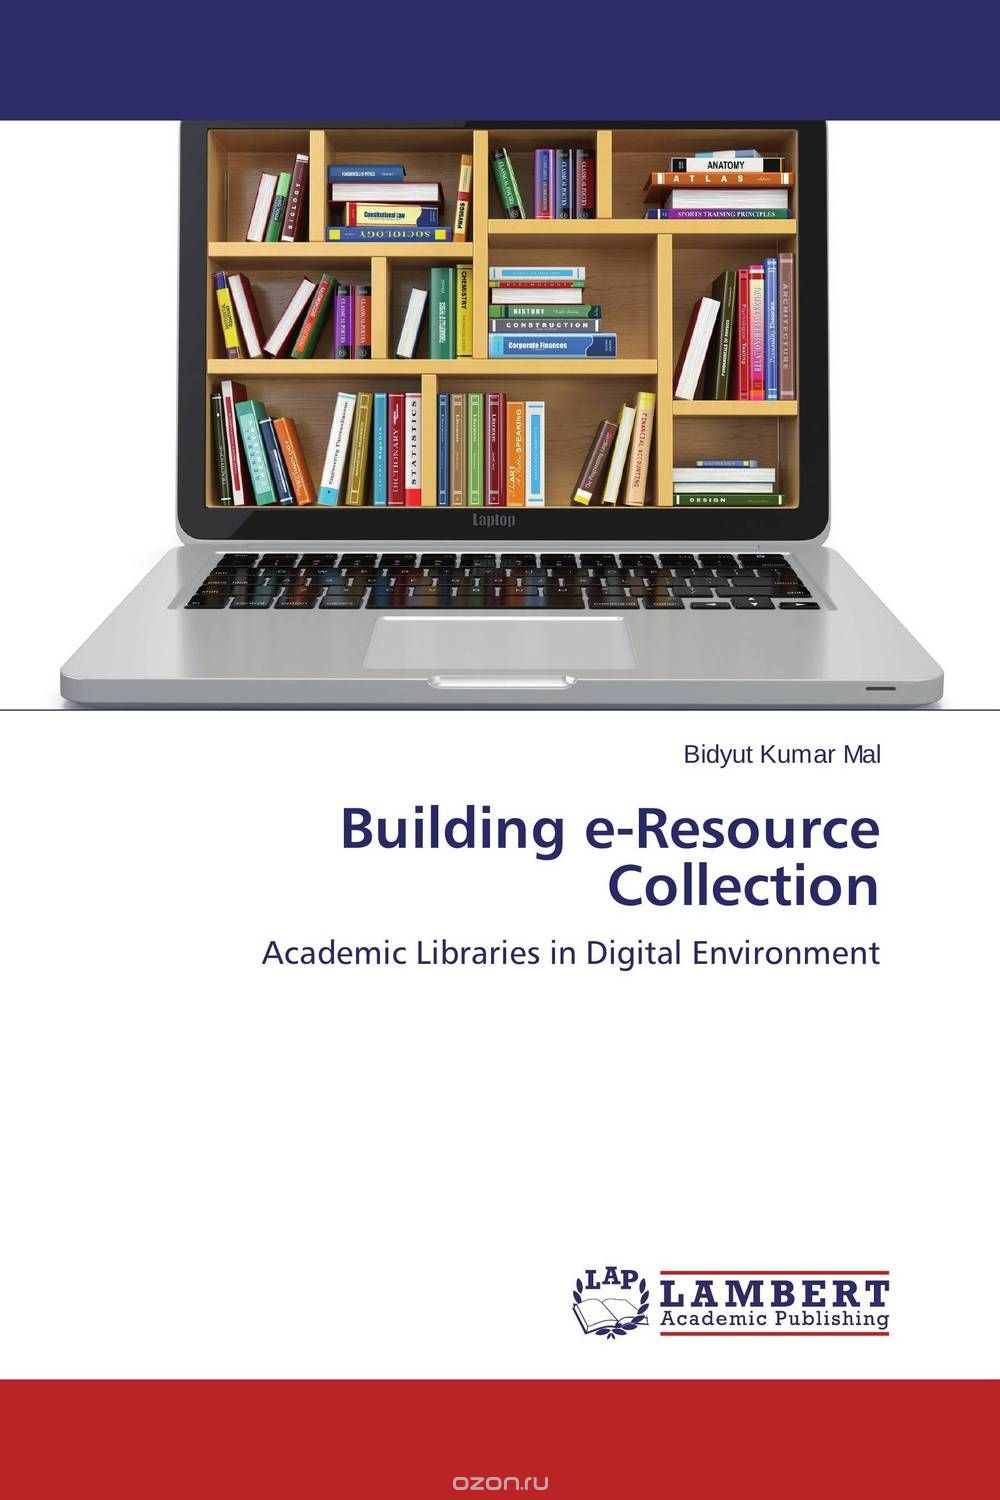 Building e-Resource Collection